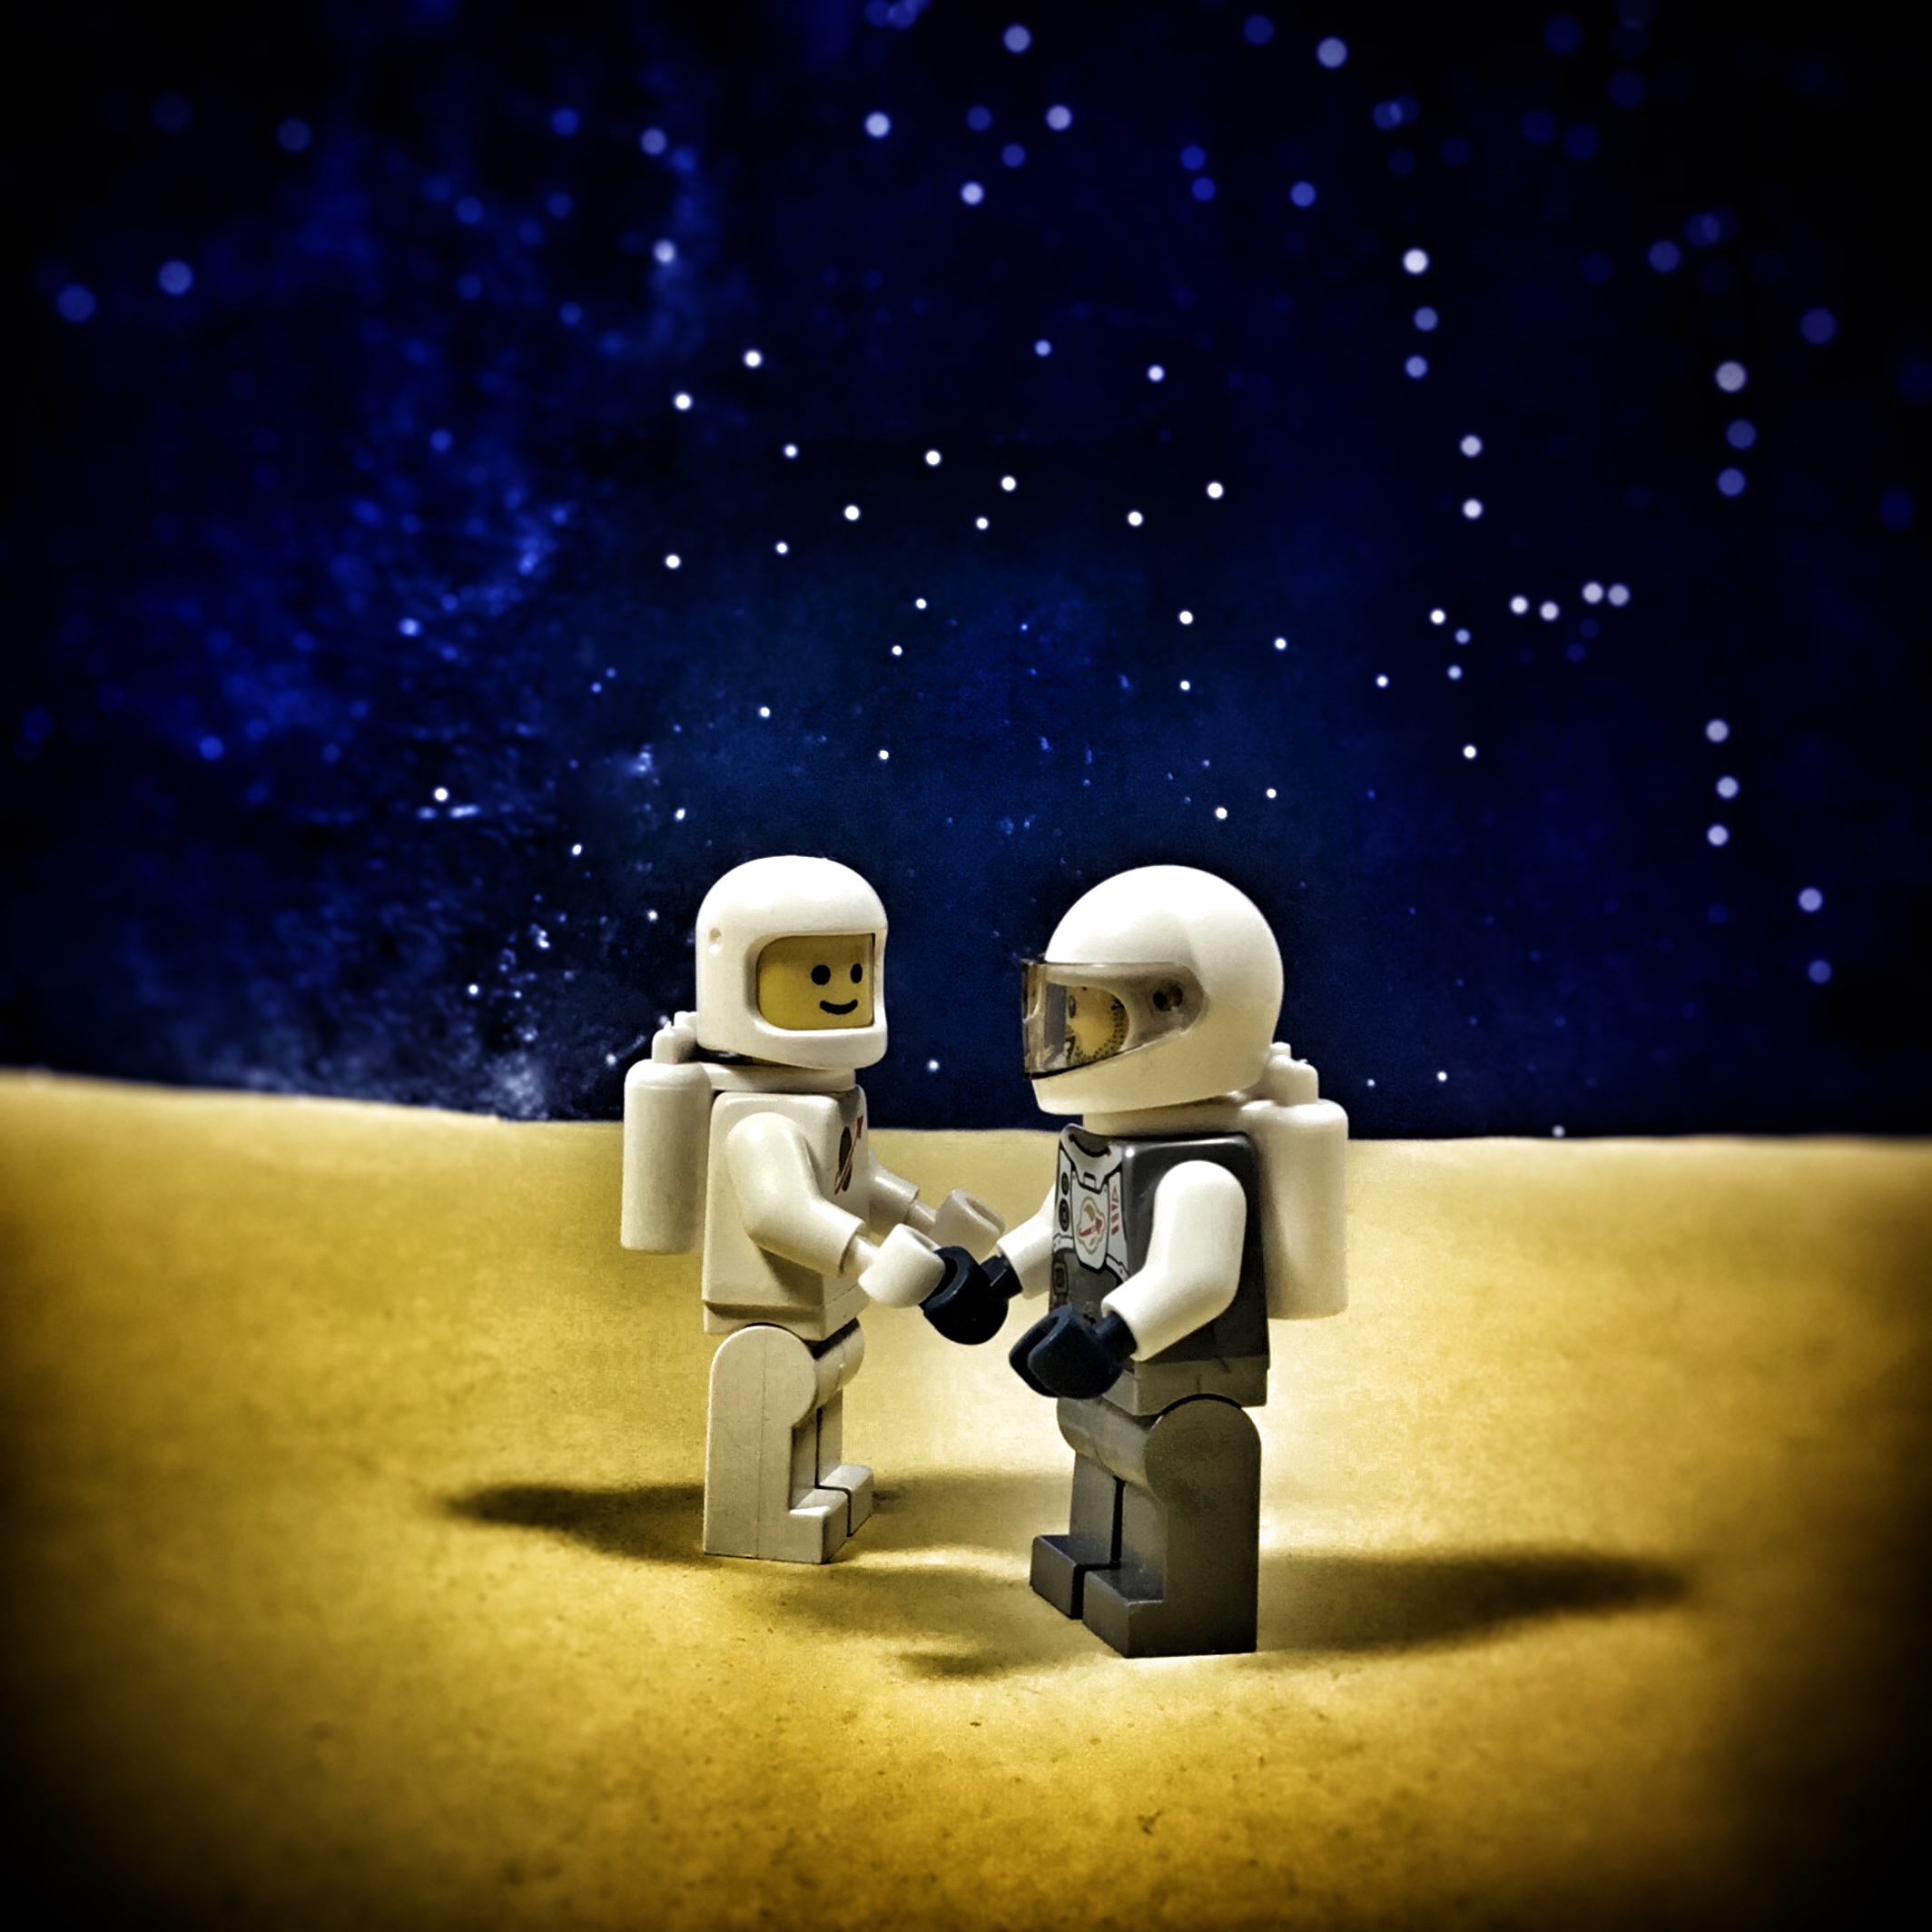 Lego Minifigure Lego Minifig Lego Space Classic Space White Spaceman Rough Condition 2Pack